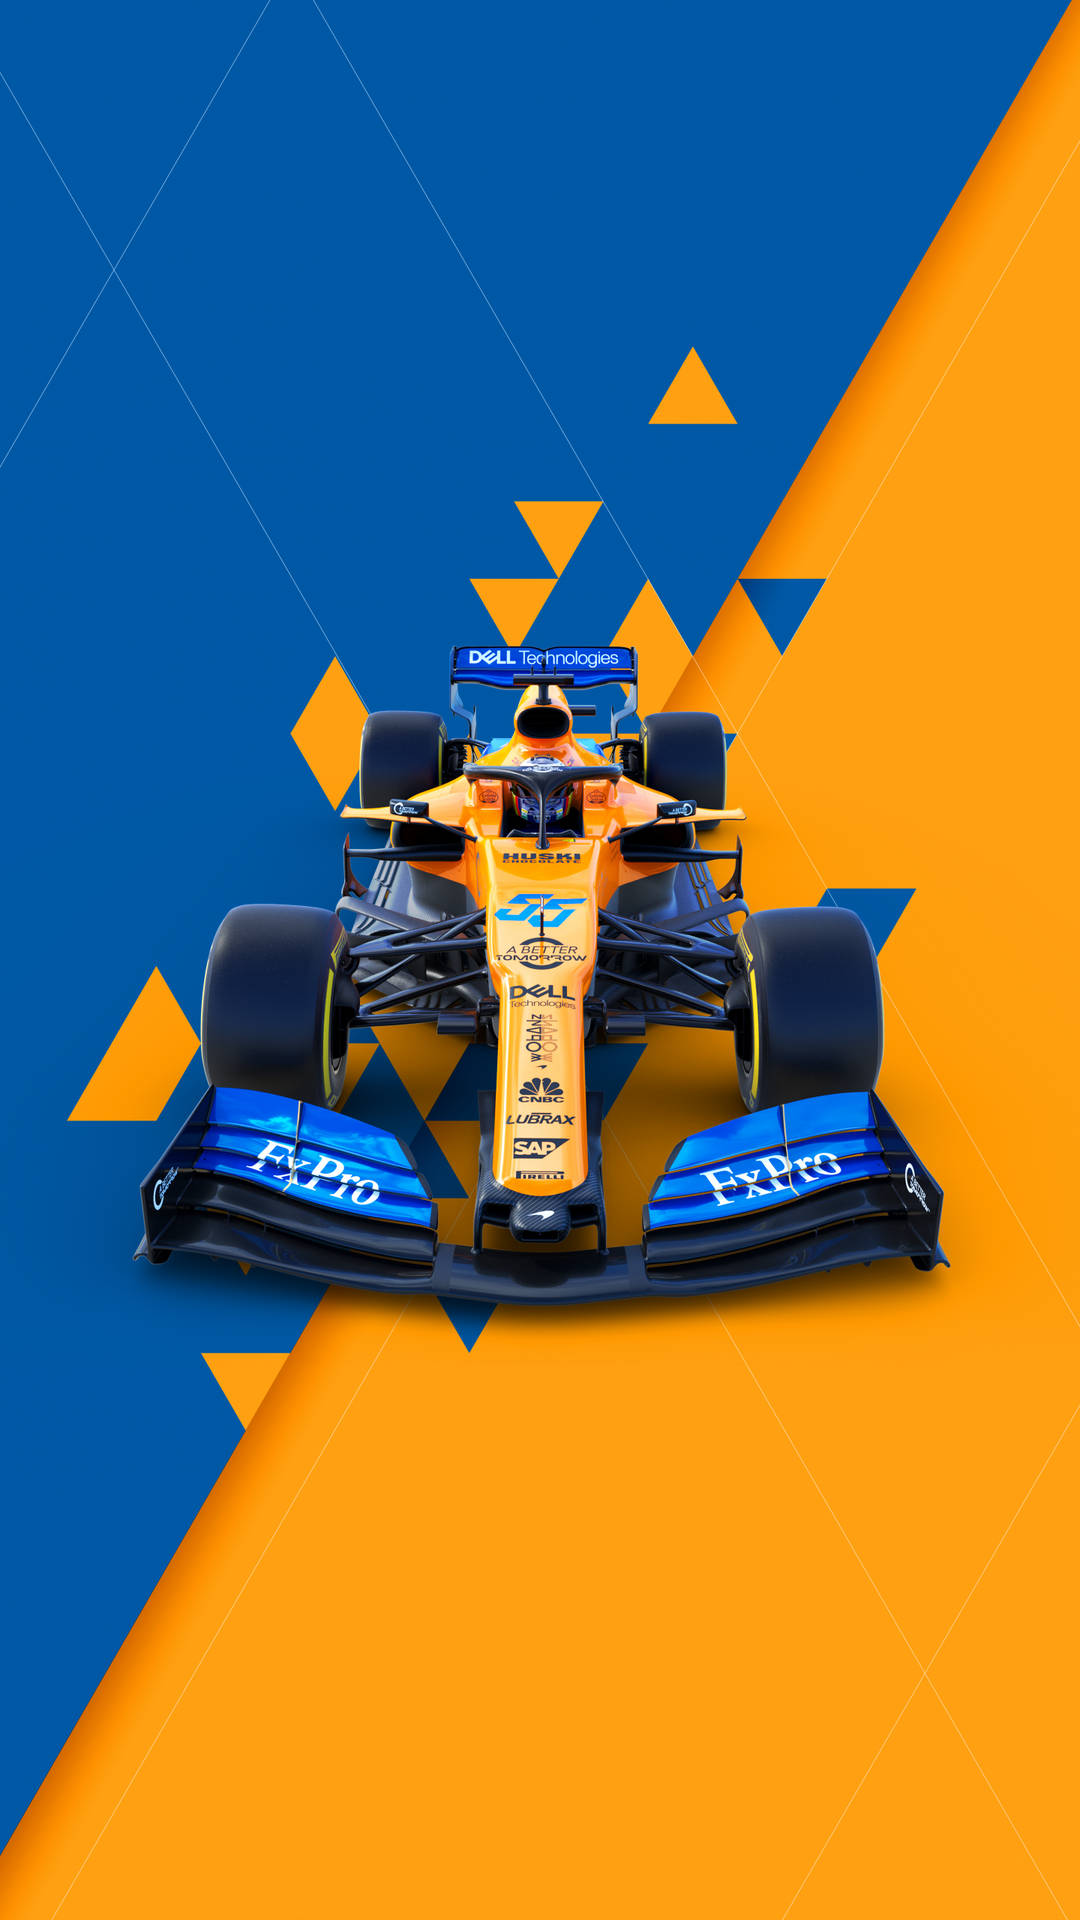 A Blue And Orange Racing Car On A Blue And Yellow Background Wallpaper